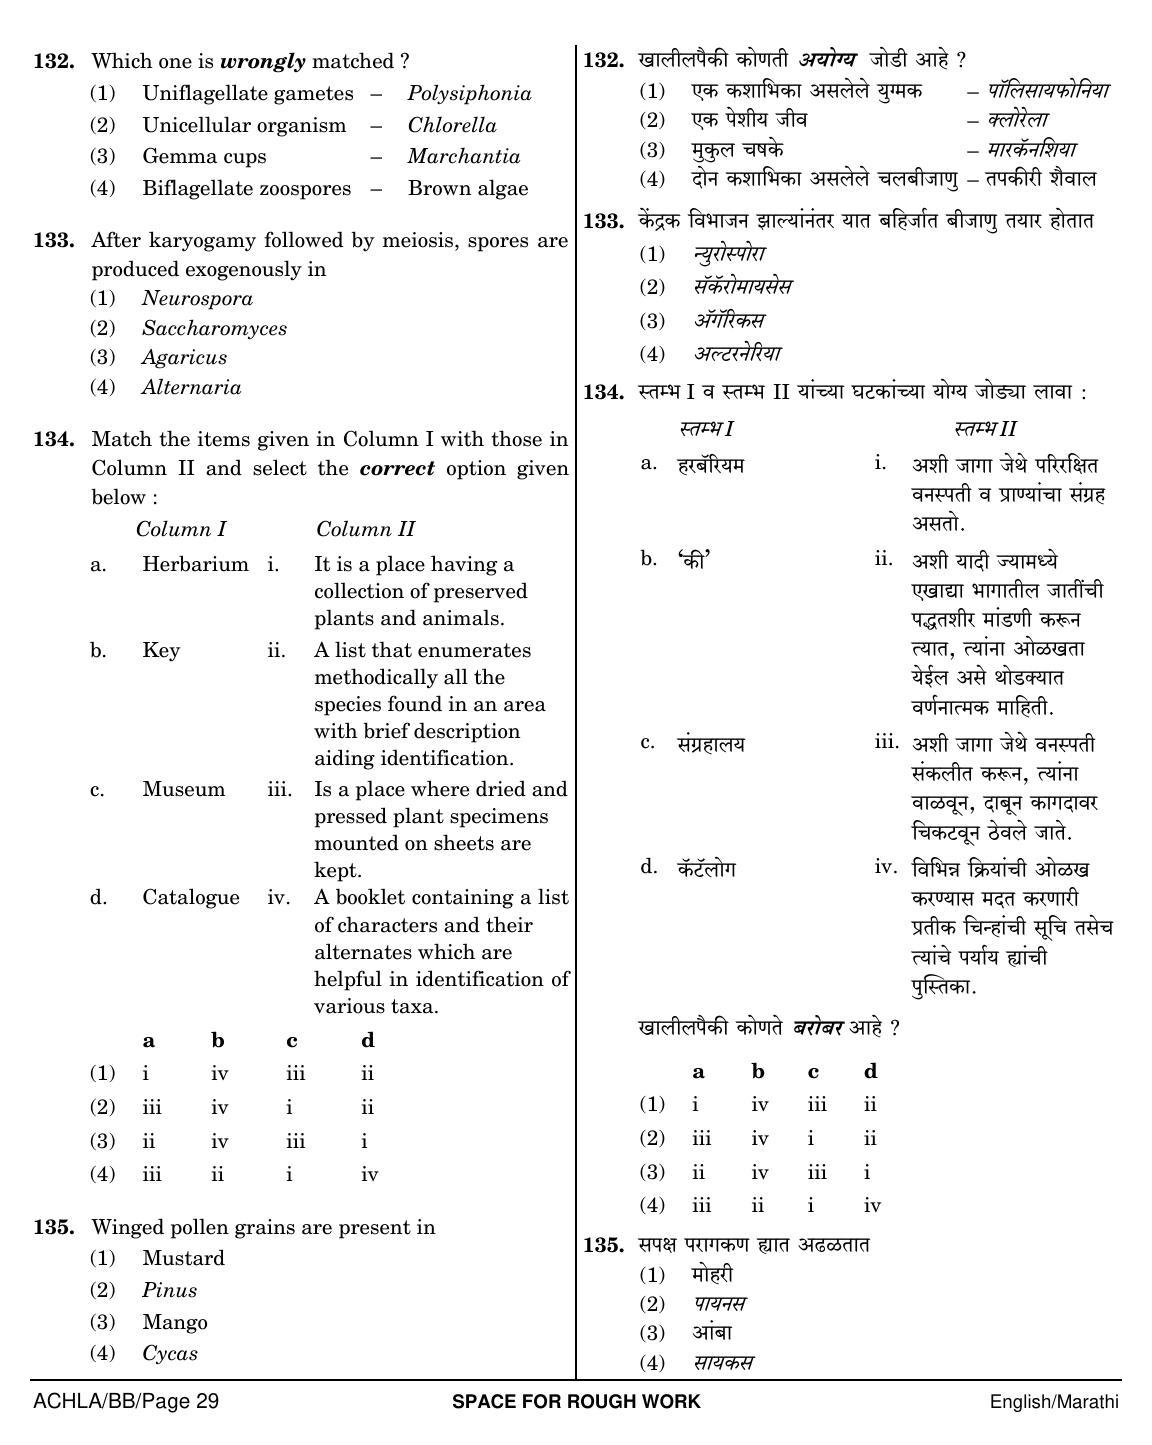 NEET Marathi BB 2018 Question Paper - Page 29